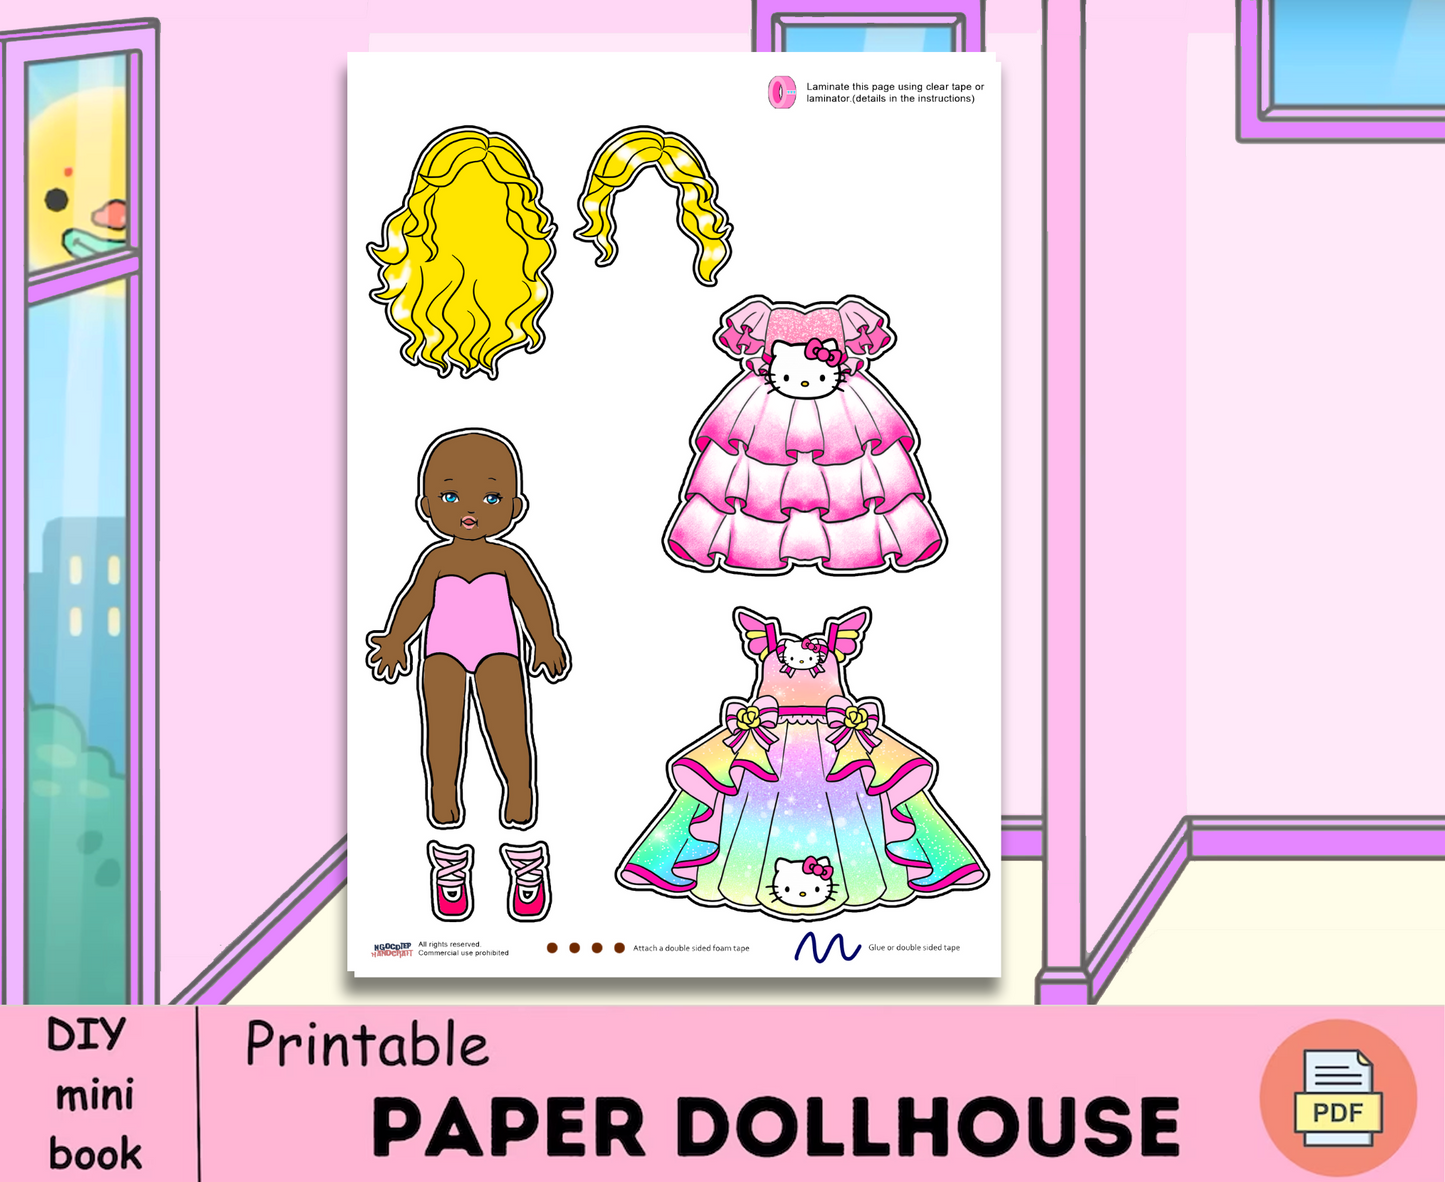 Printable Hello Kitty Dress for Barbie Dolls 🌺 Refresh your doll’s style with lovely dresses | free product 🌺 Woa Doll Crafts